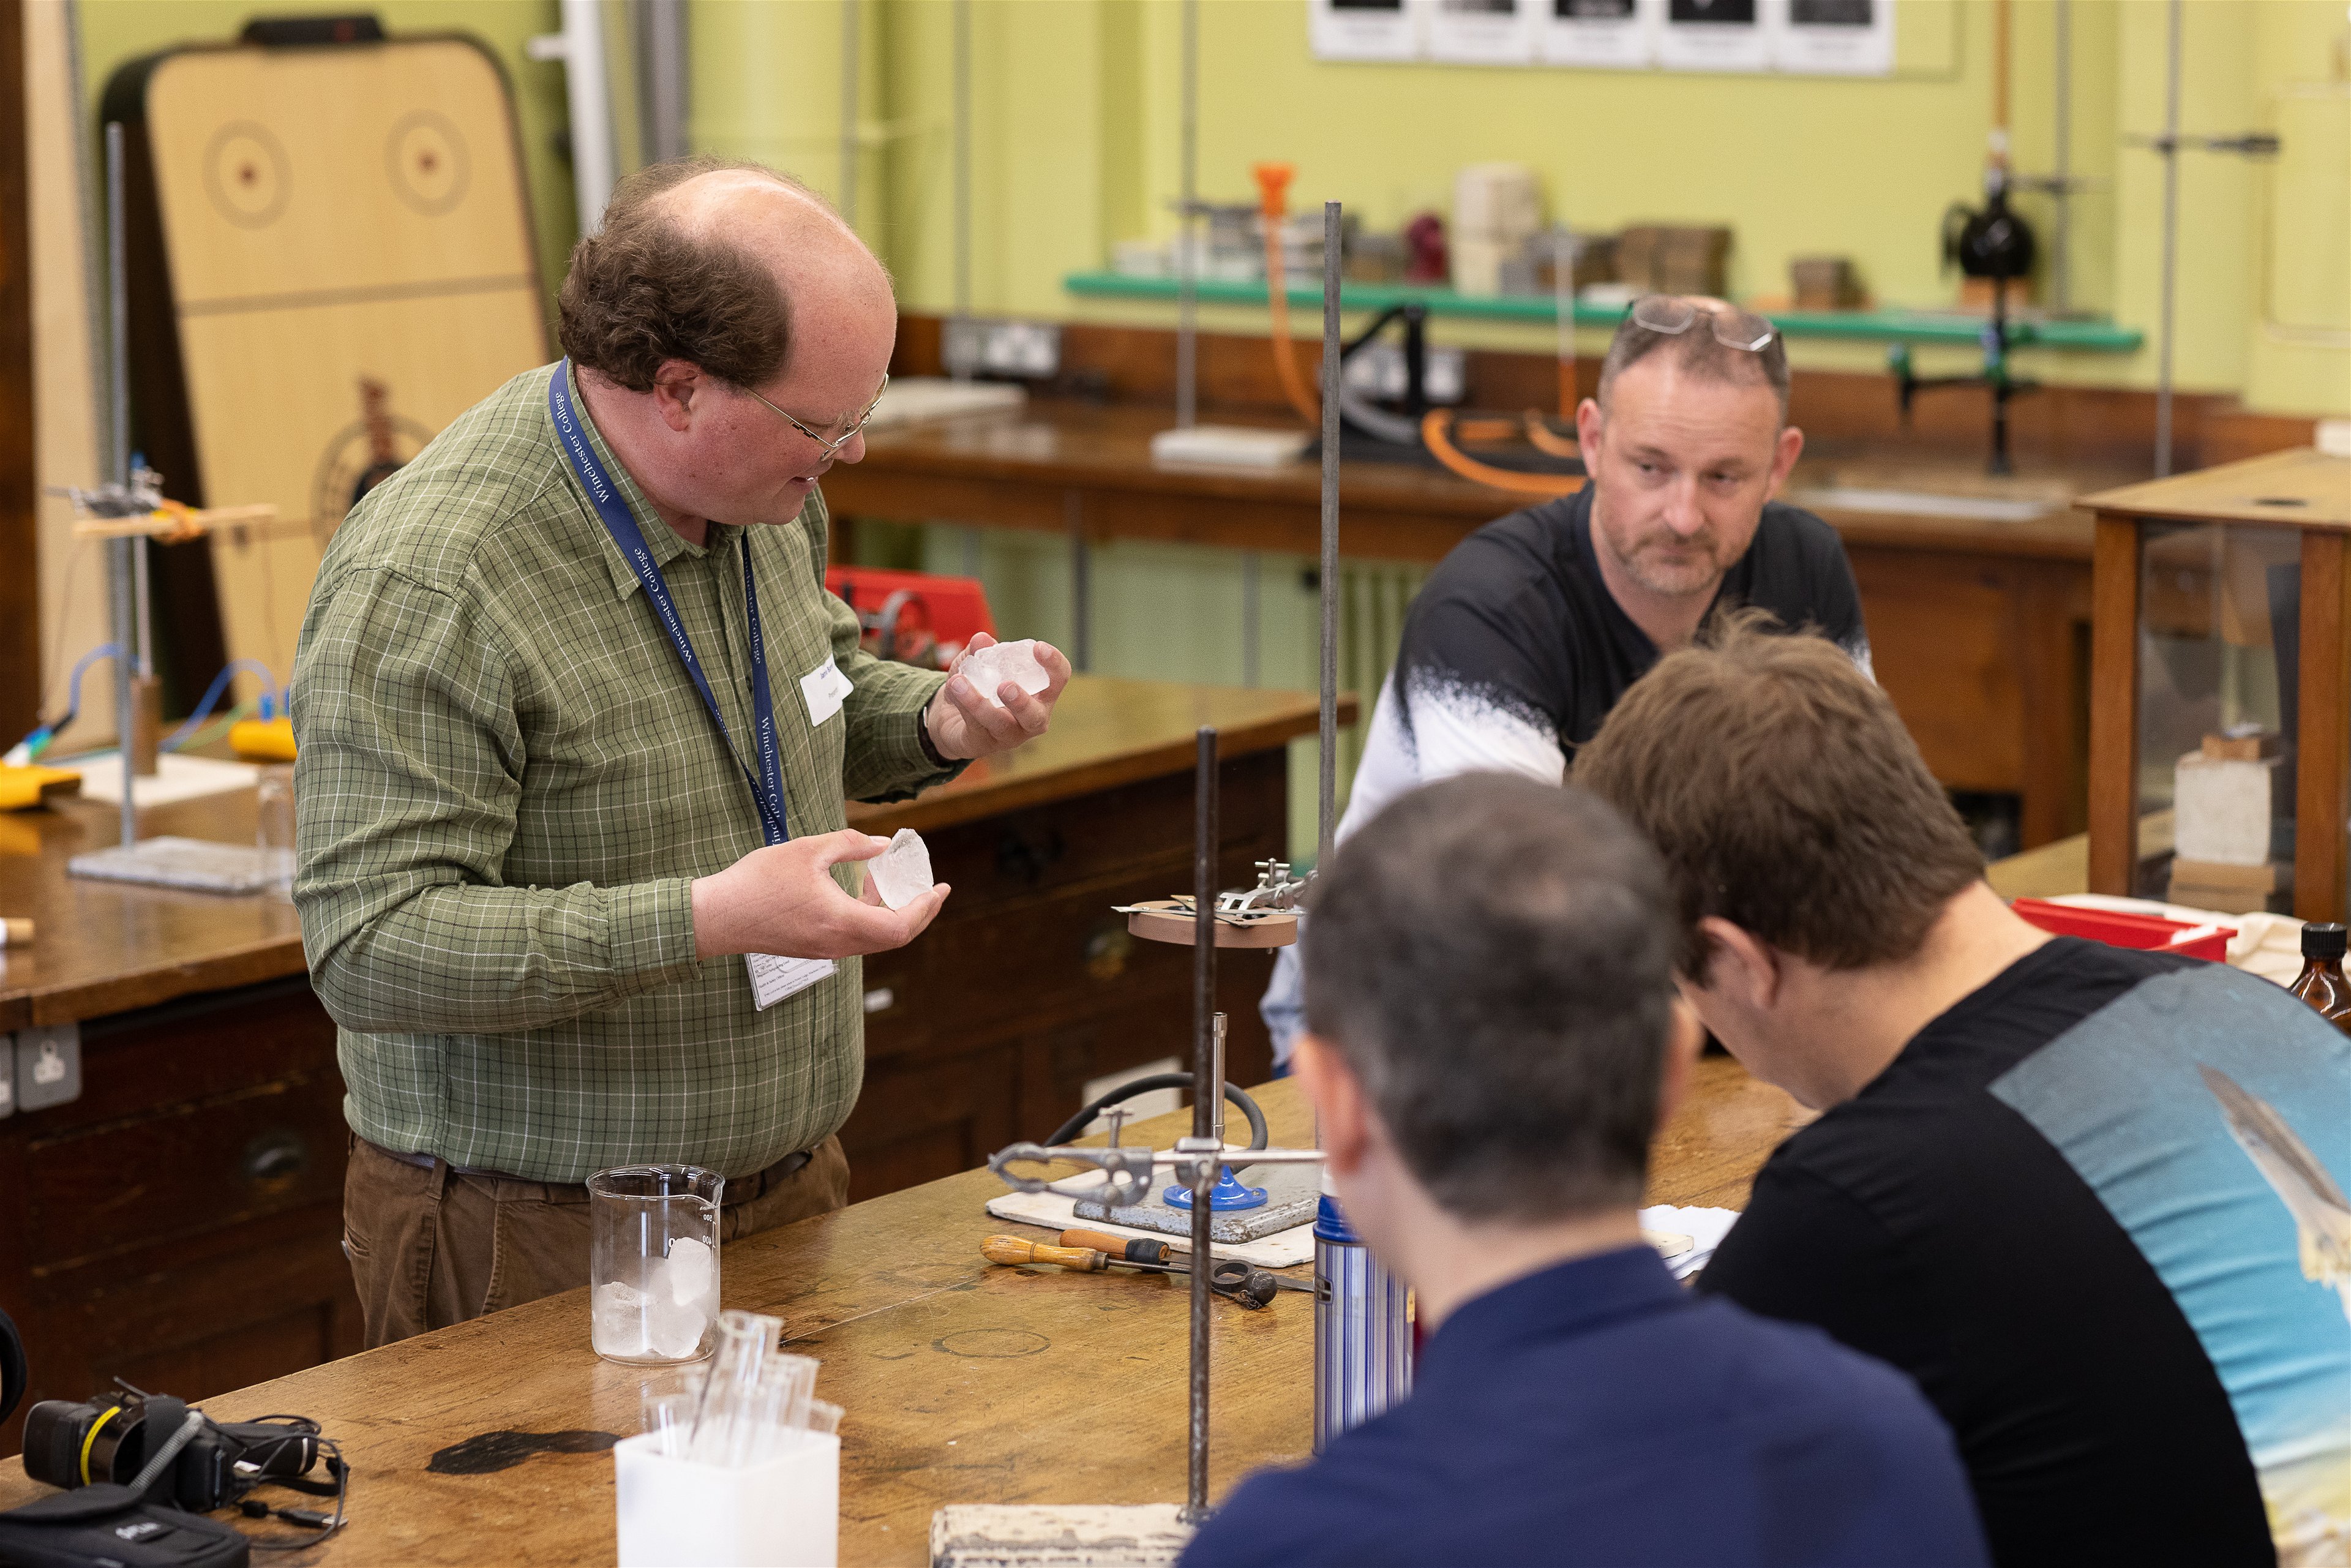 'Electricity' in-person workshop at Homewood School for Tenterden Physics Hub